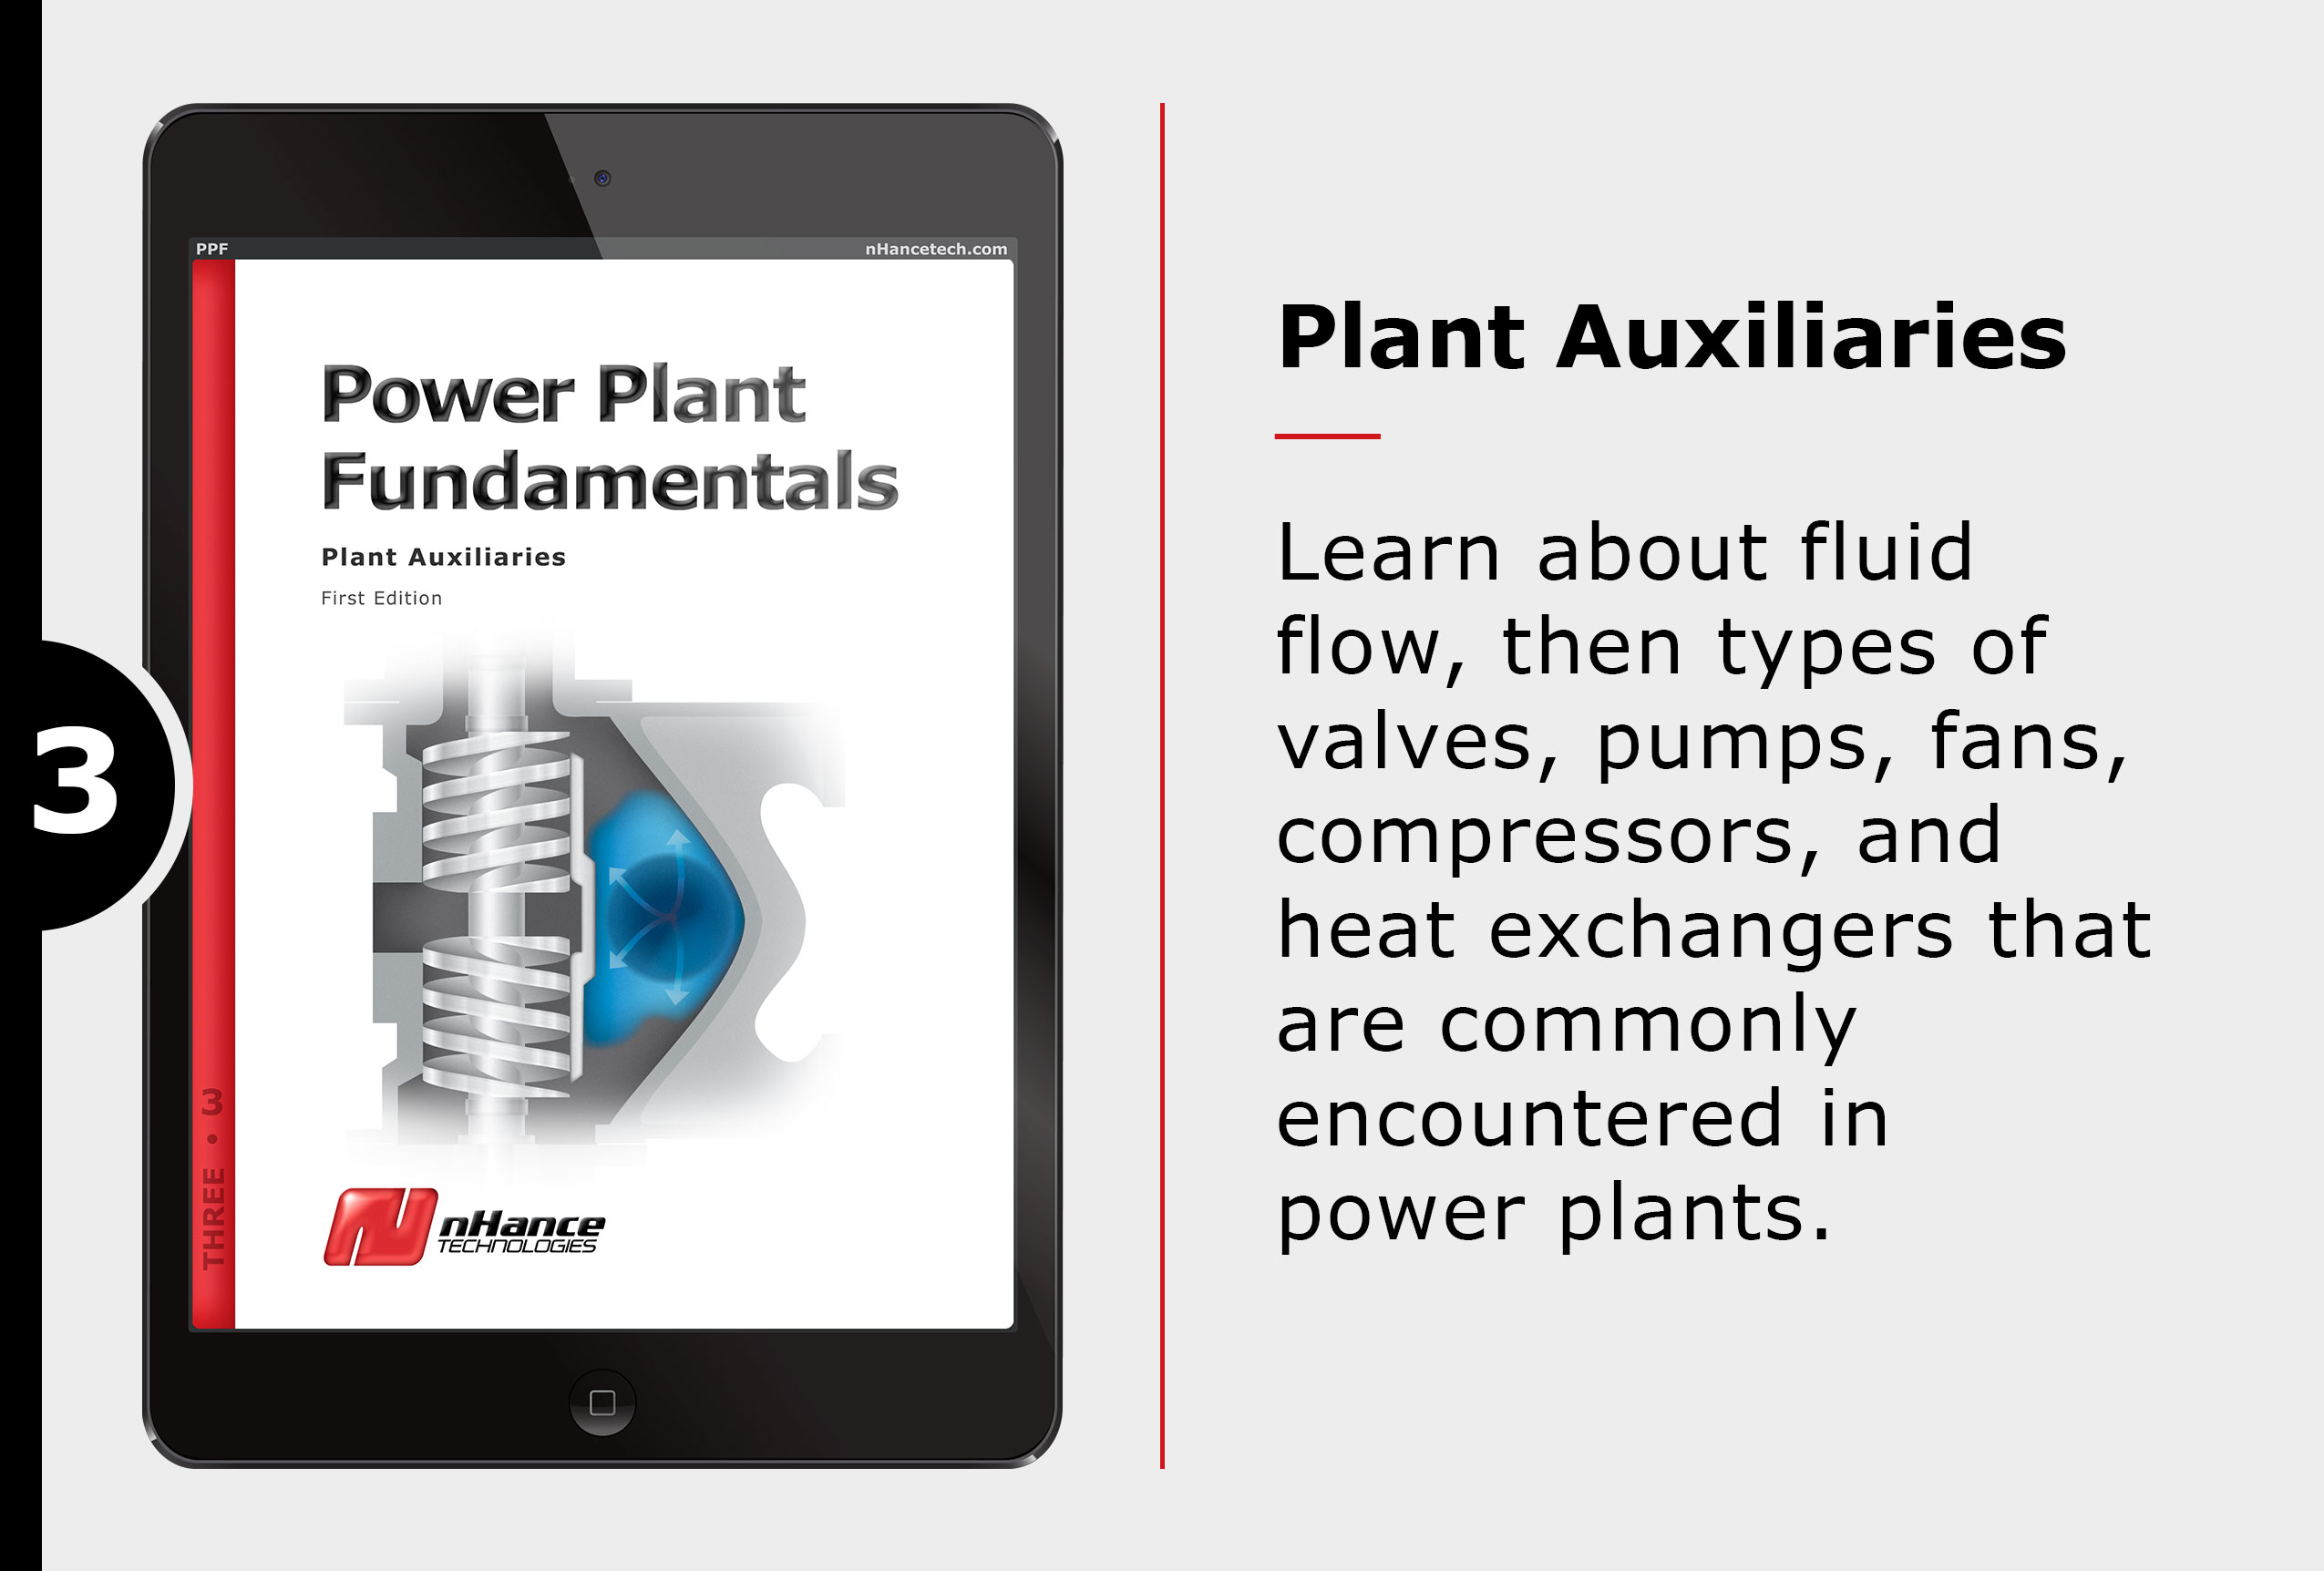 Power Plant Auxiliaries — Learn about fluid flow, then types of valves, pumps, fans, compressors, and heat exchangers that are commonly encountered in power plants in this ebook from the Power Plant Fundamentals series.